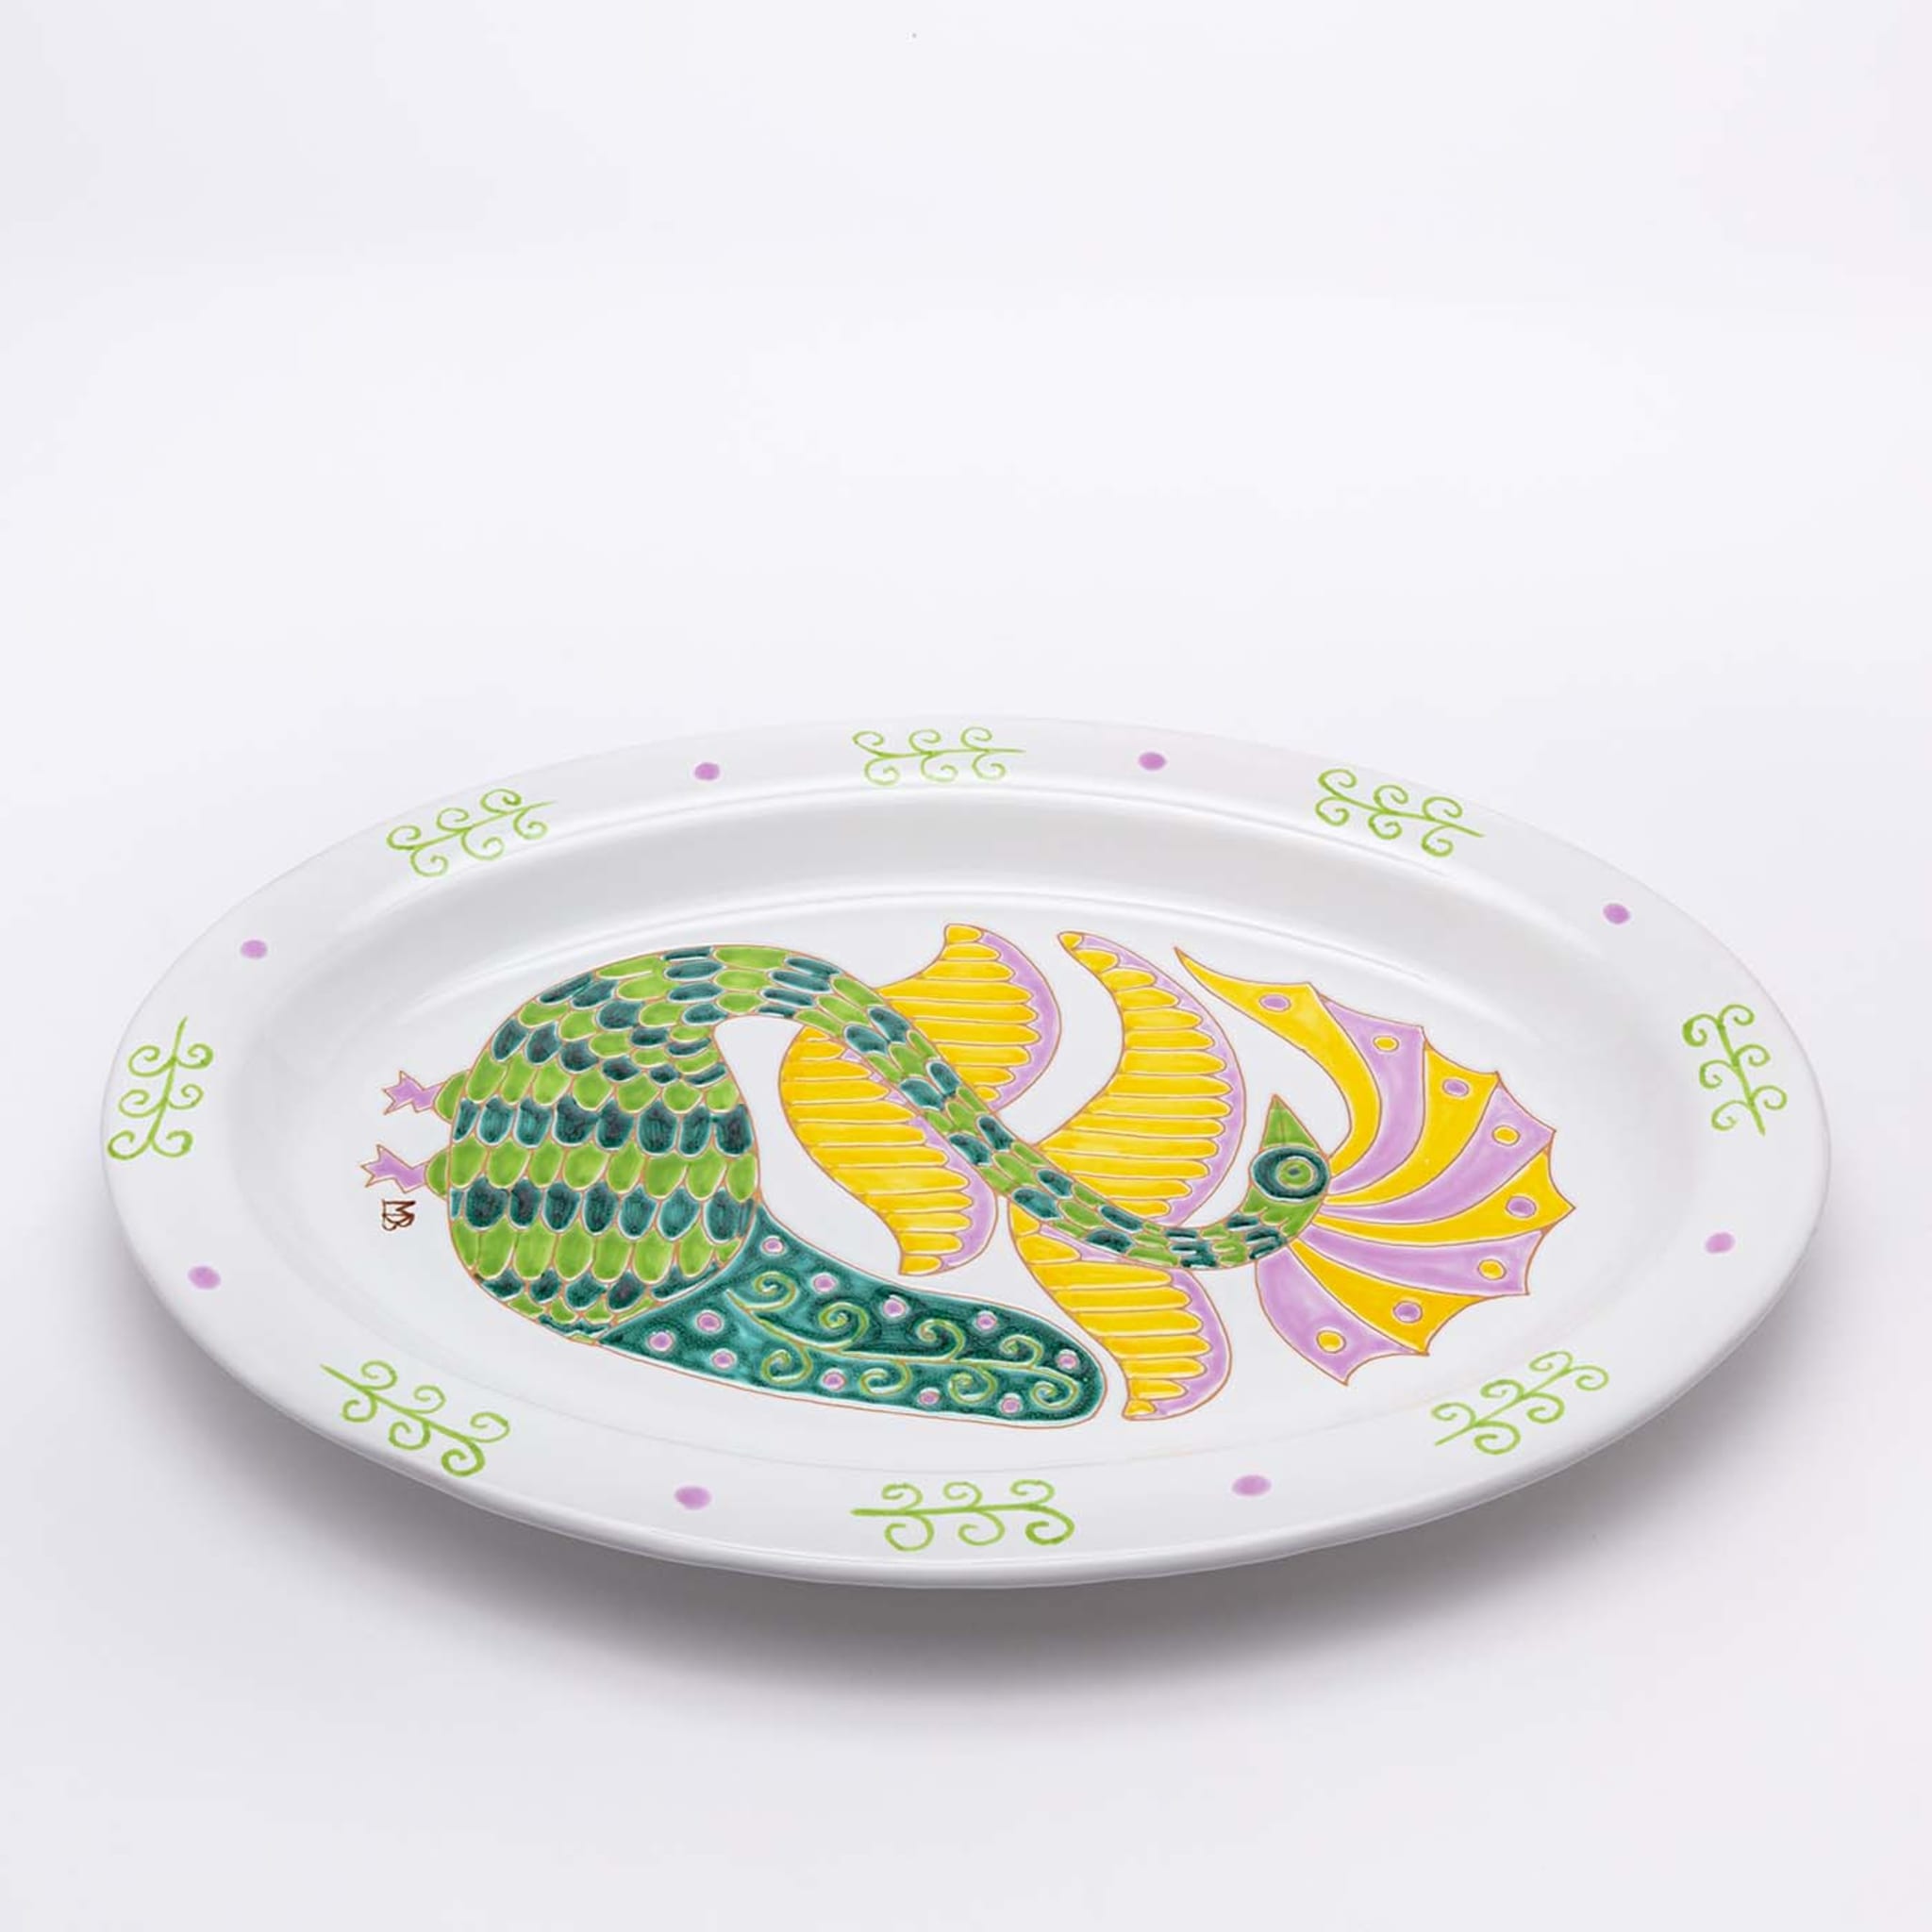 Le Fenici Oval Green and Yellow Tray - Alternative view 2